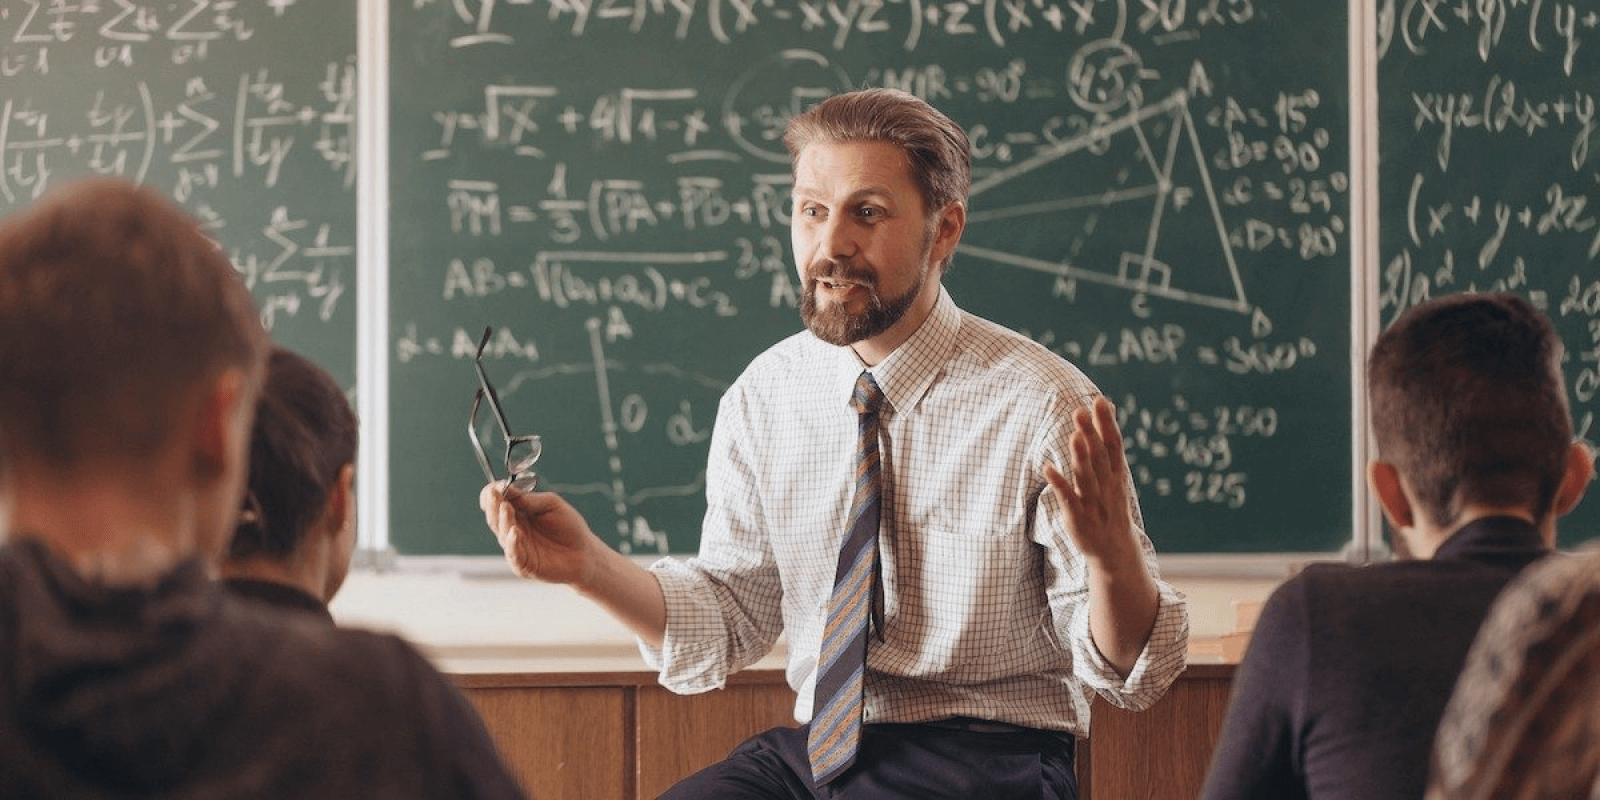 Male teacher is talking to students and is seated at the front of a classroom with mathematical equations and figures on the chalkboard behind him